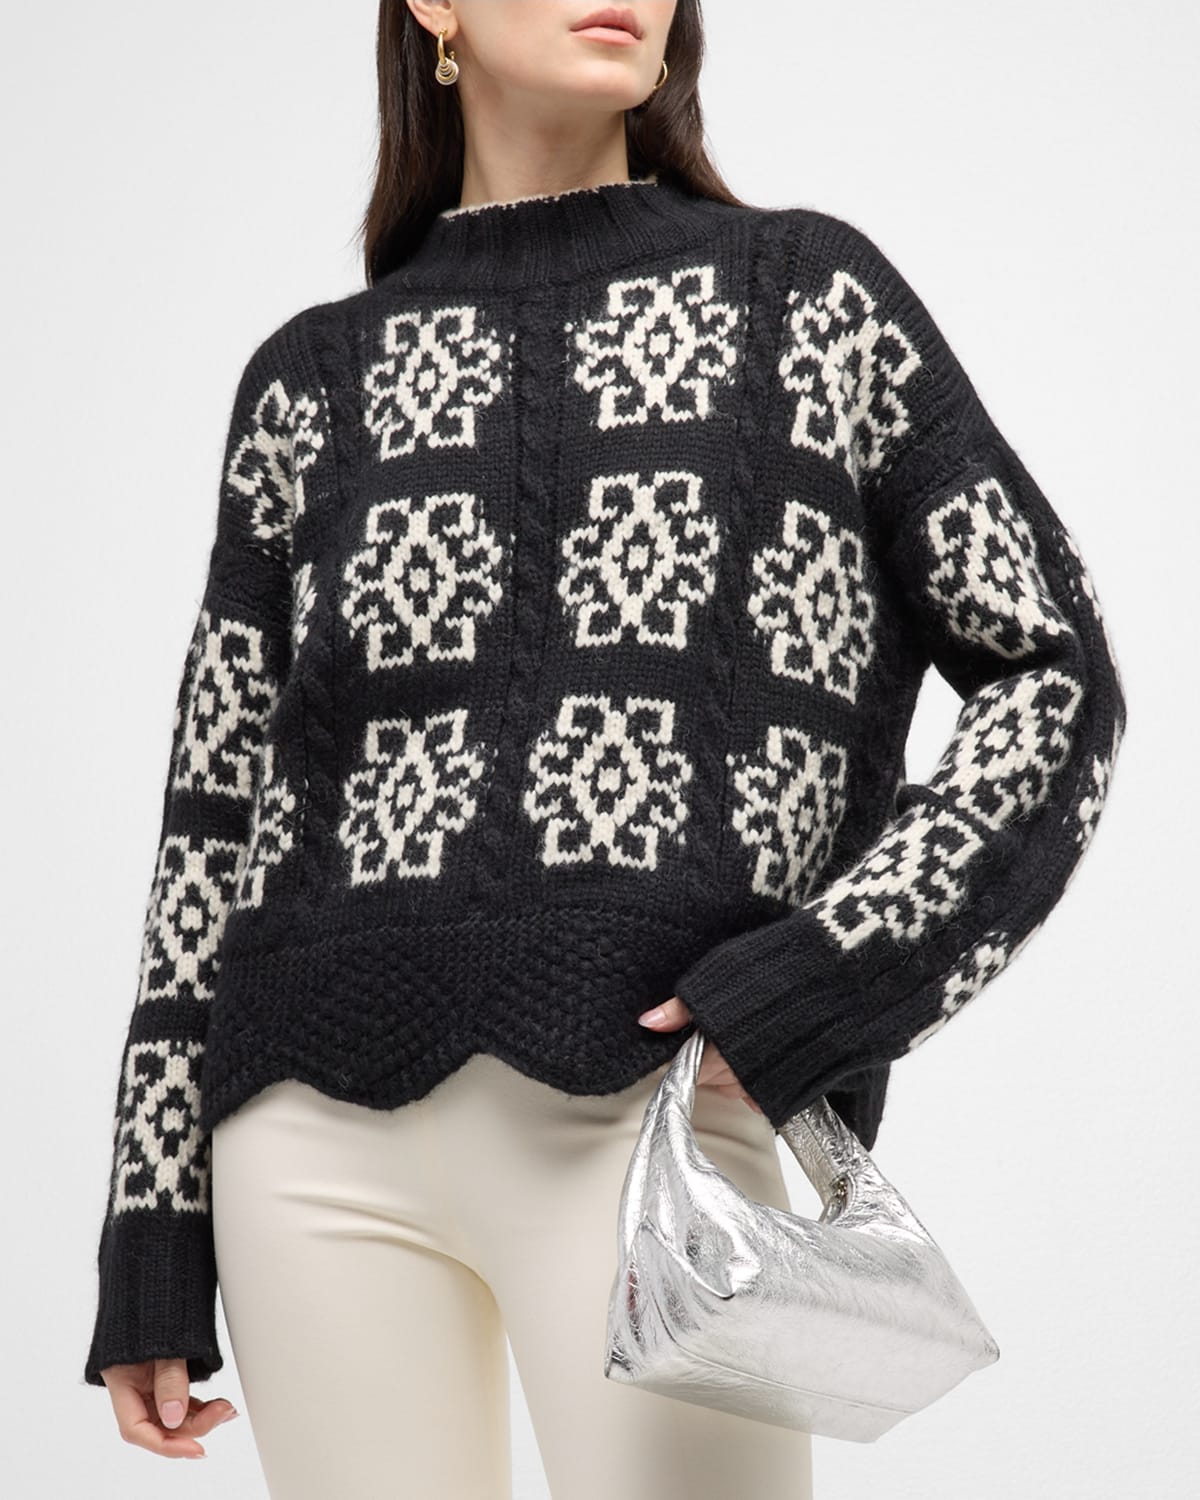 ELEVEN SIX SIENNA CABLE-KNIT GEOMETRIC INTARSIA SWEATER